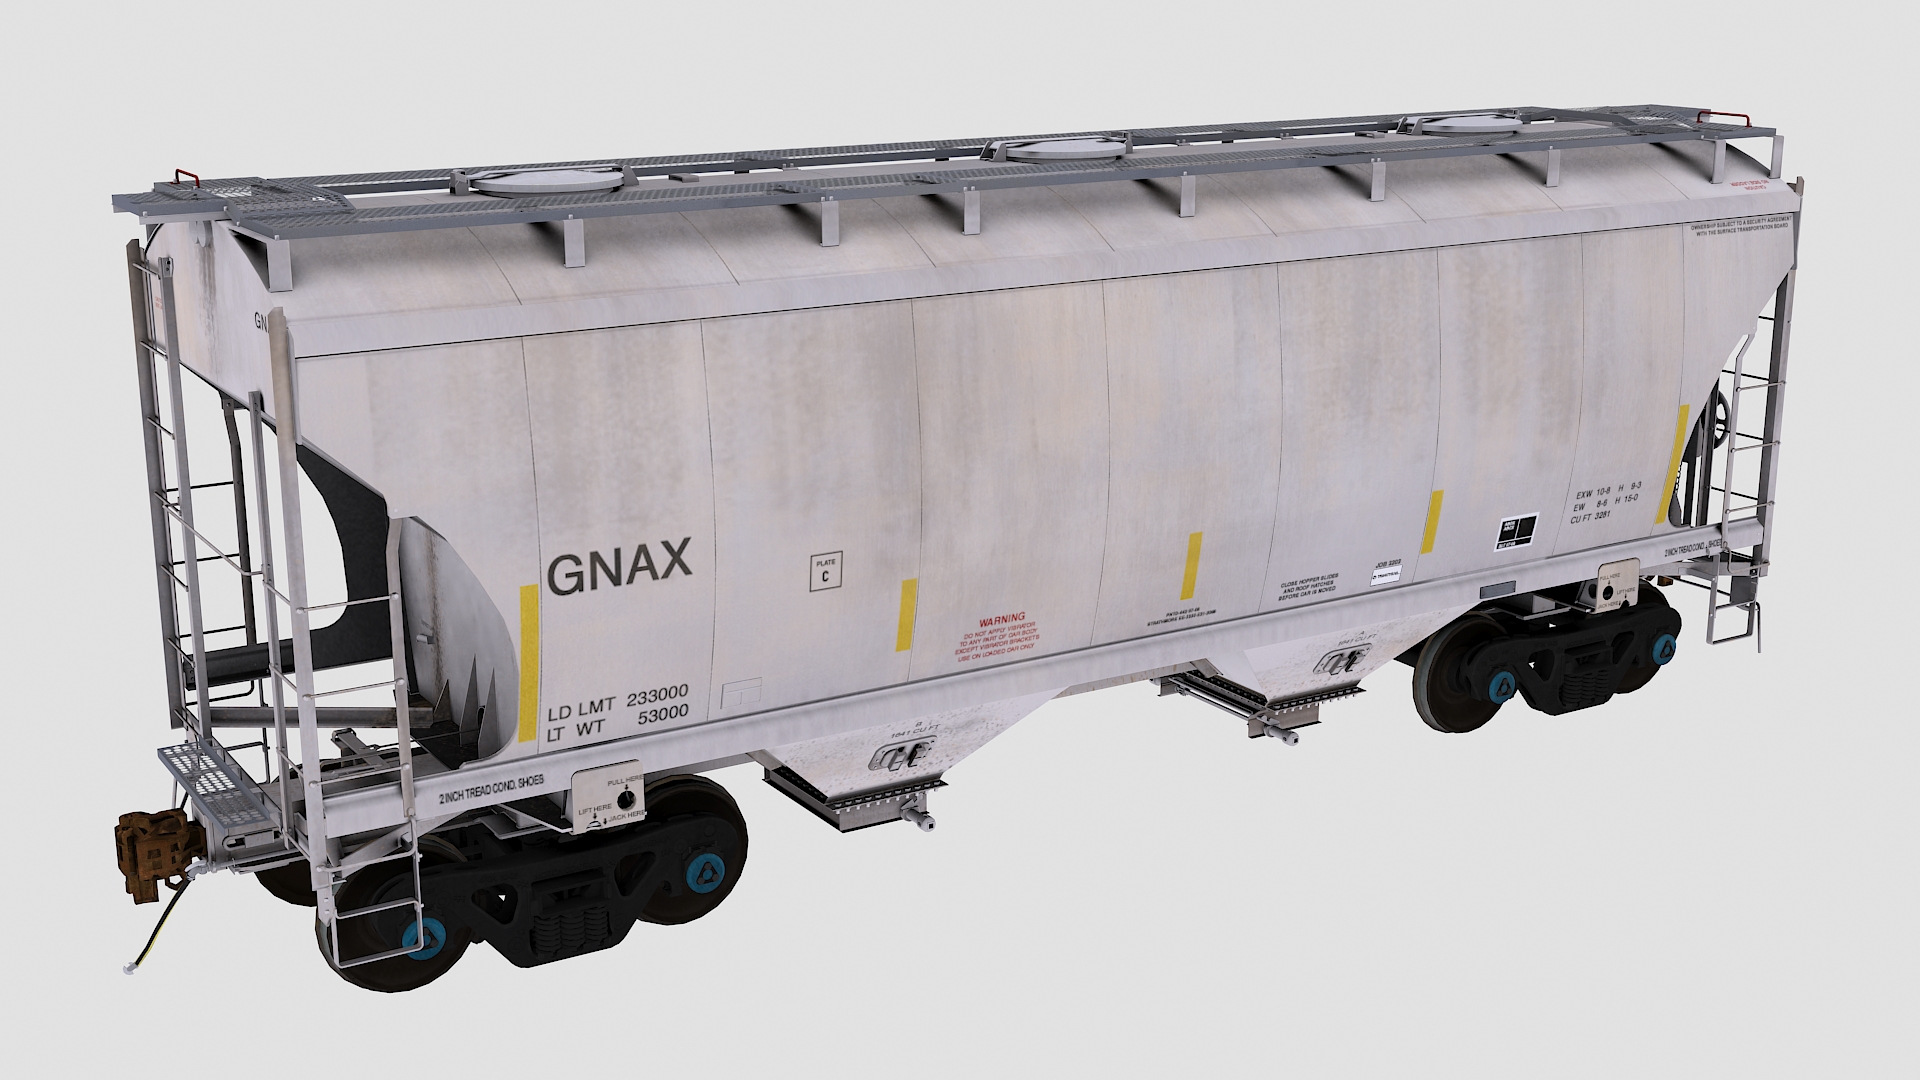 Gnax is two bay covered hopper